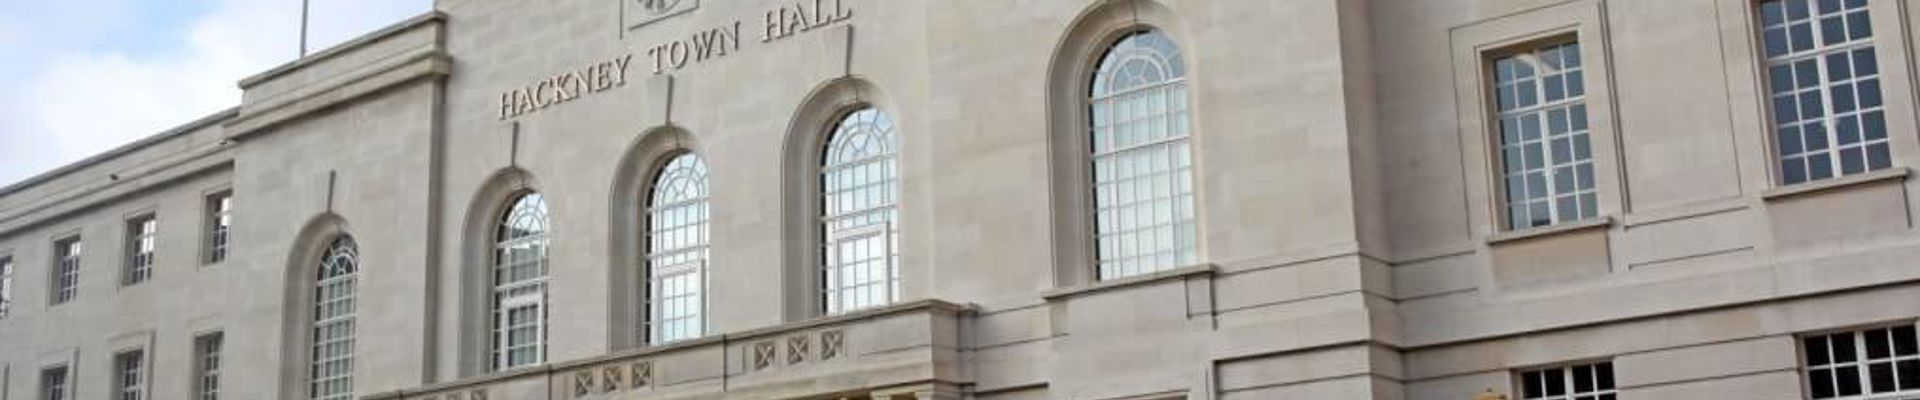 London Borough of Hackney chooses Cloud-based financial solutions with private Cloud hosting from Advanced